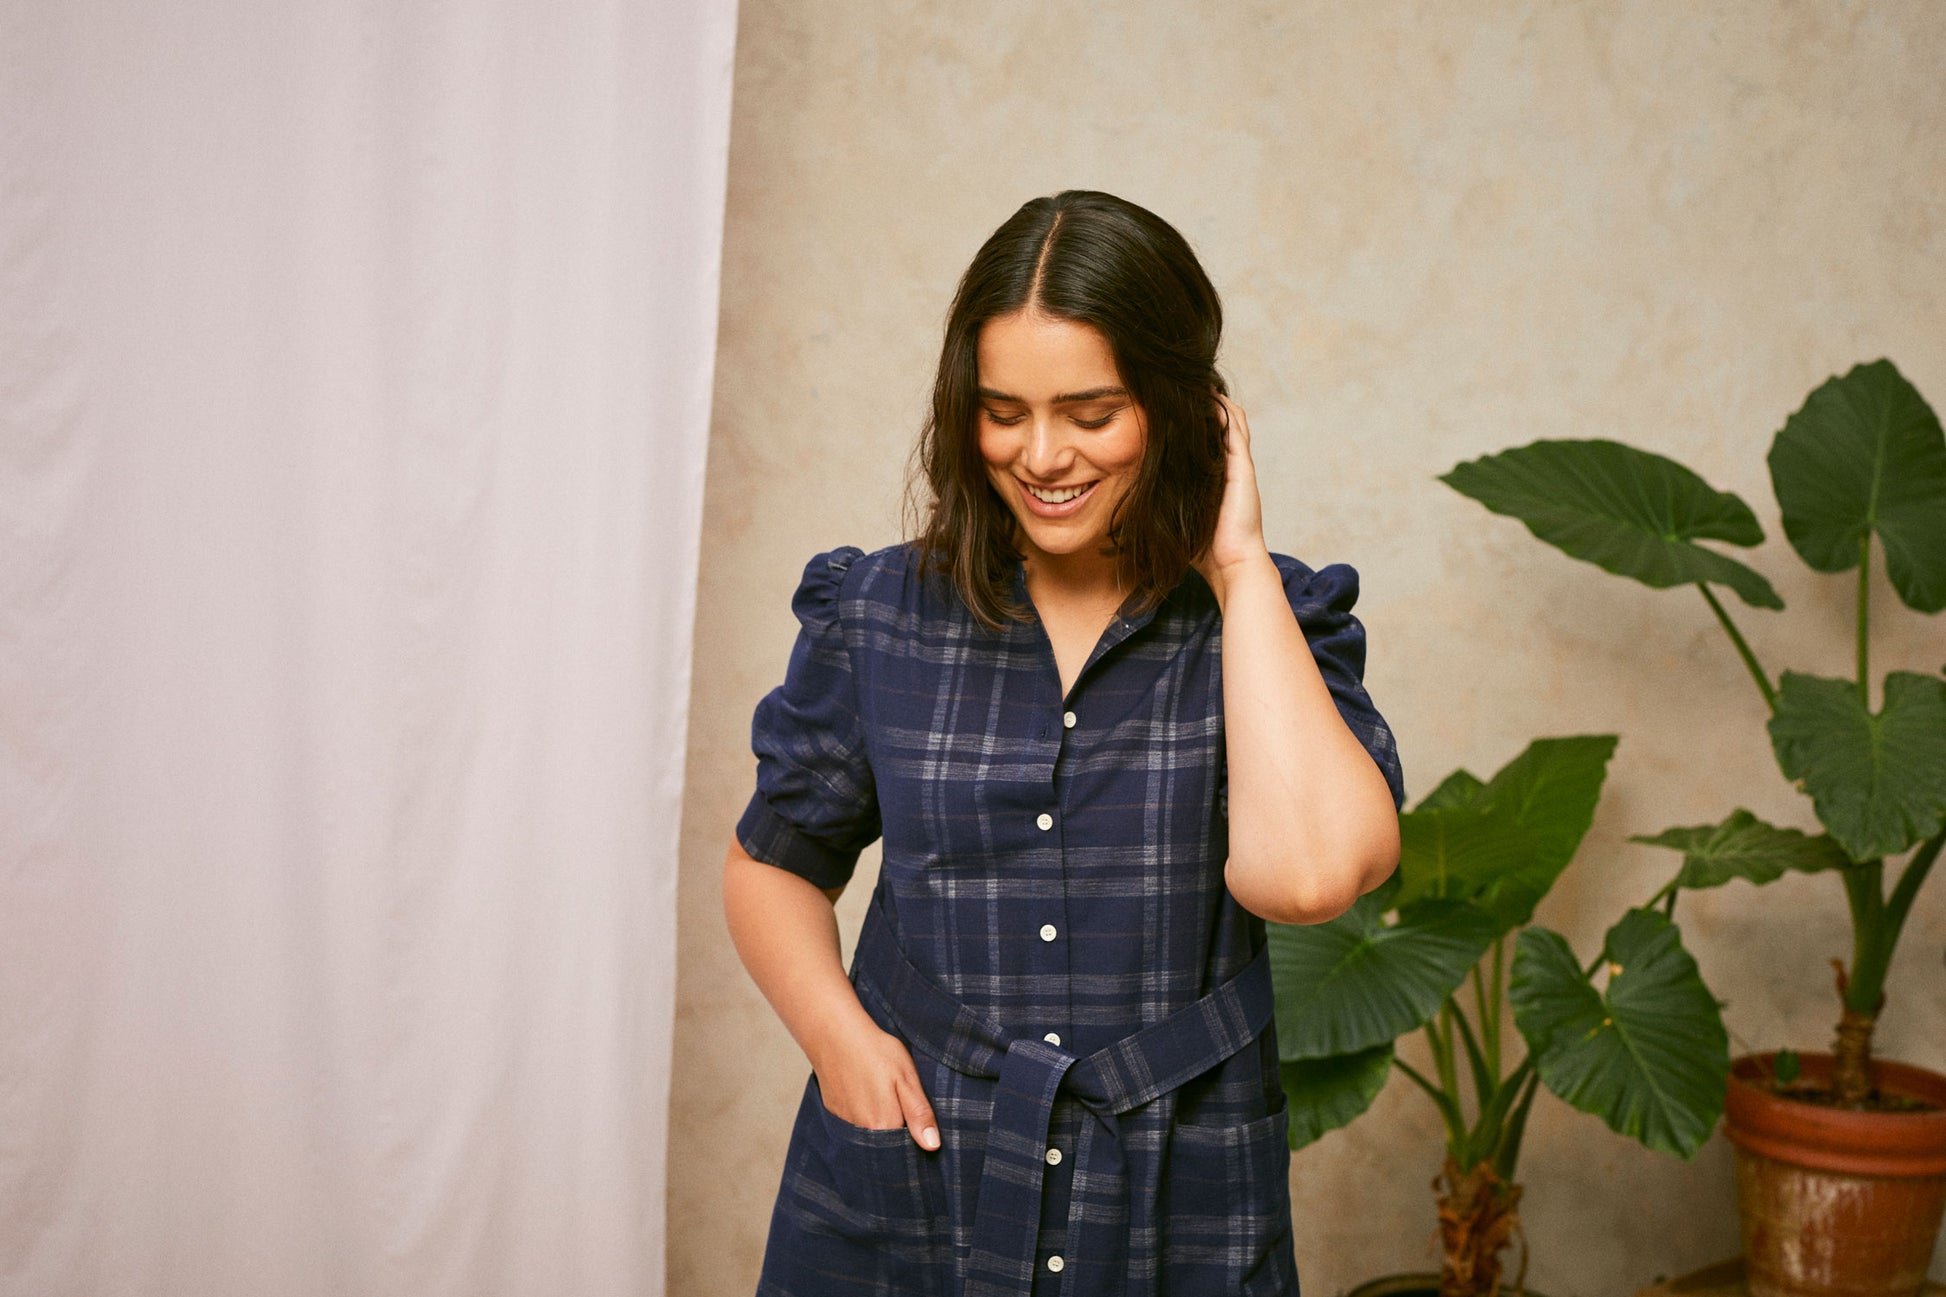 Close up crop of model wearing Saywood's Rosa navy check shirtdress, with belt loosely tied round the waist. The model is smiling with one hand to the back of her head, and a plant and drop of pink fabric can be seen in the background.